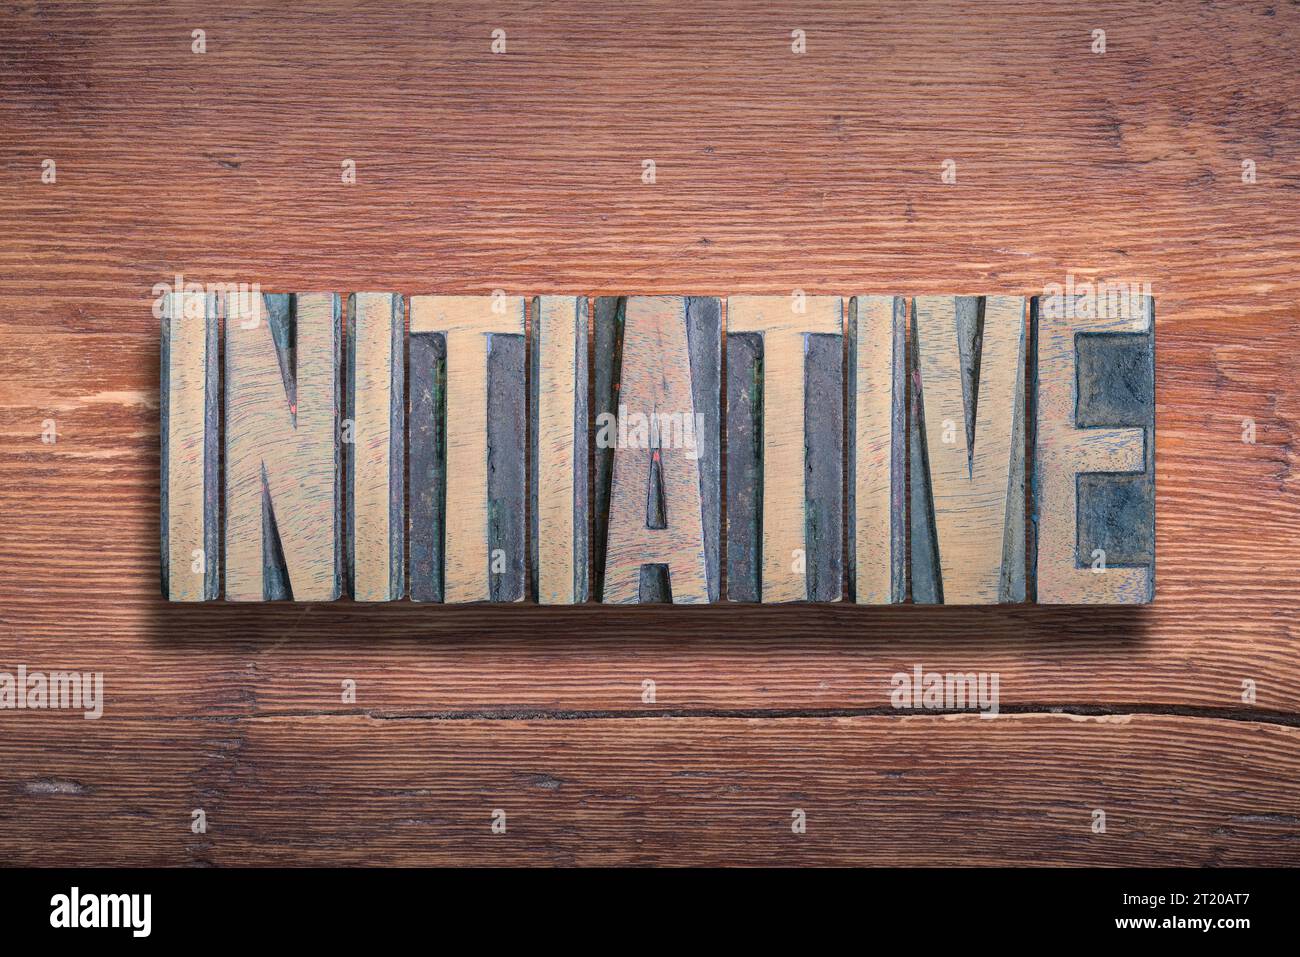 initiative word combined on vintage varnished wooden surface Stock Photo